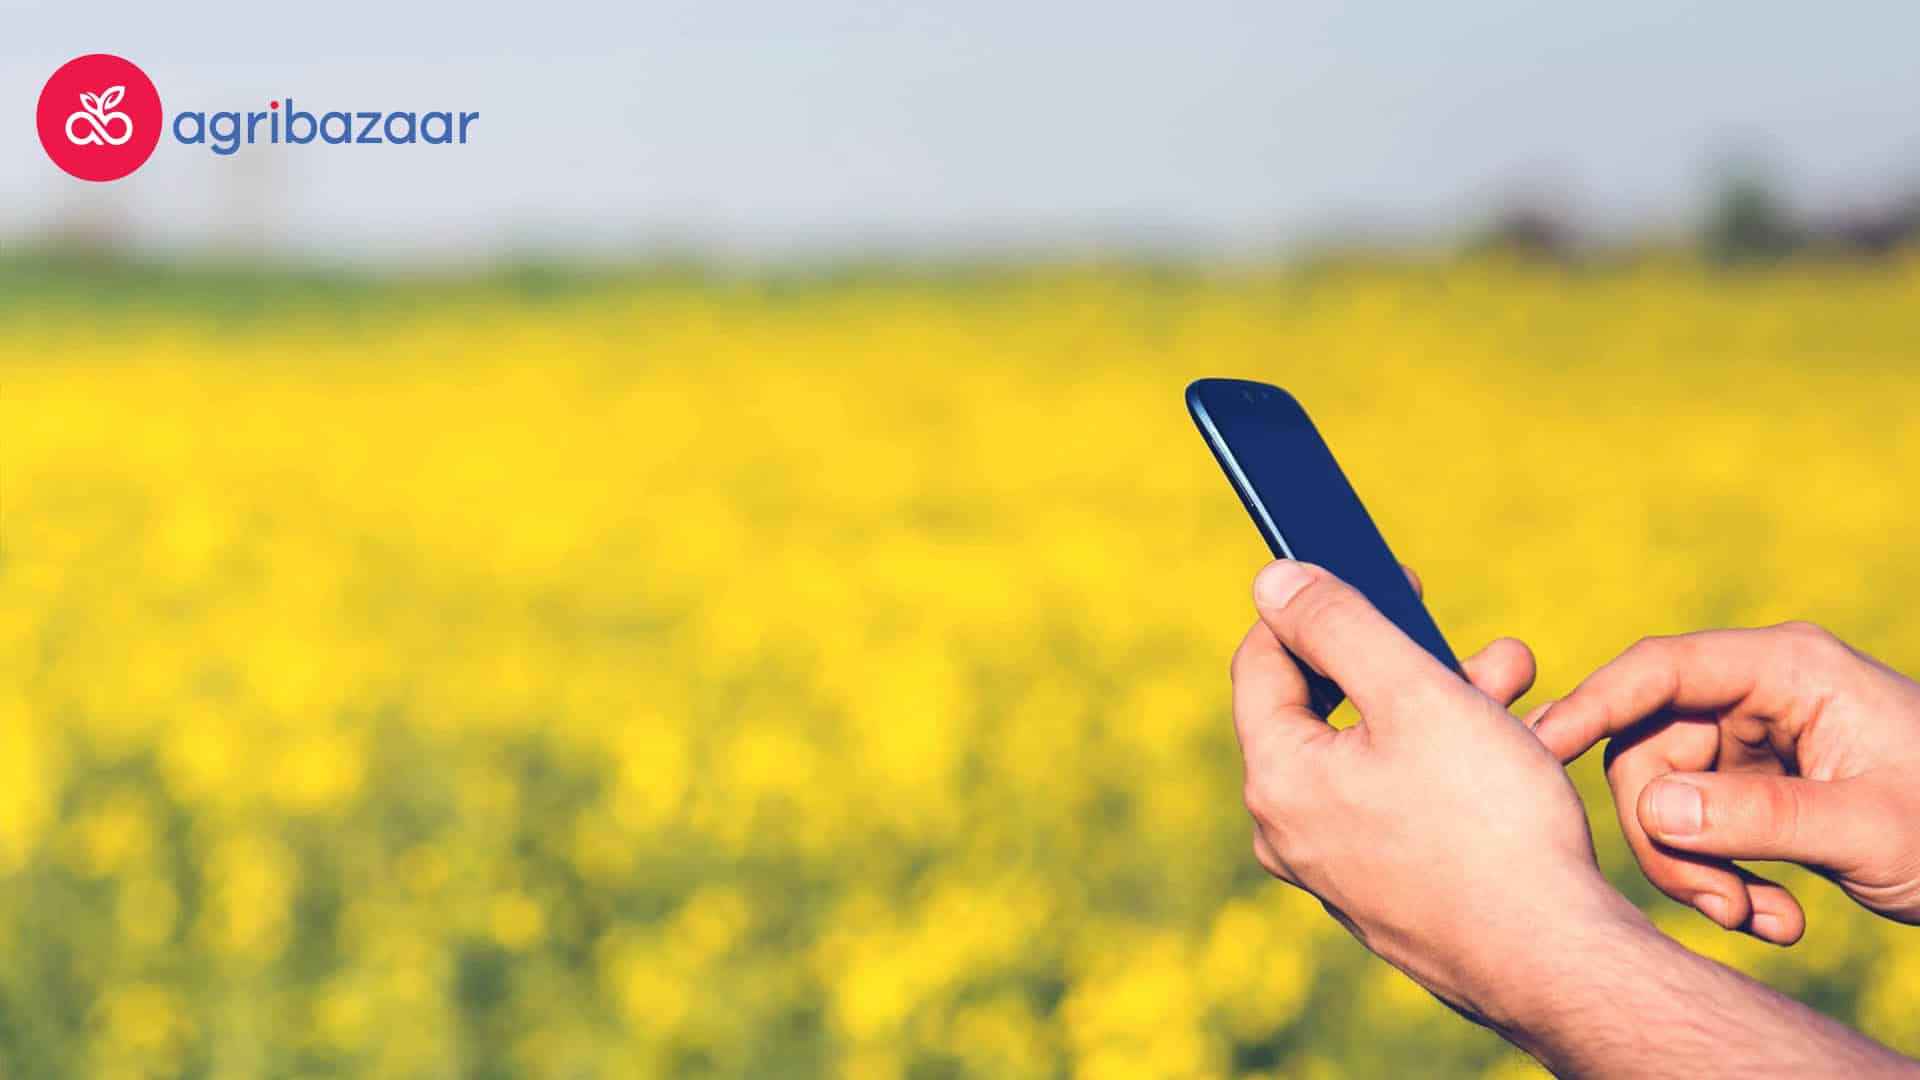 Agribazaar inks pact with govt to promote digital agriculture in rural India